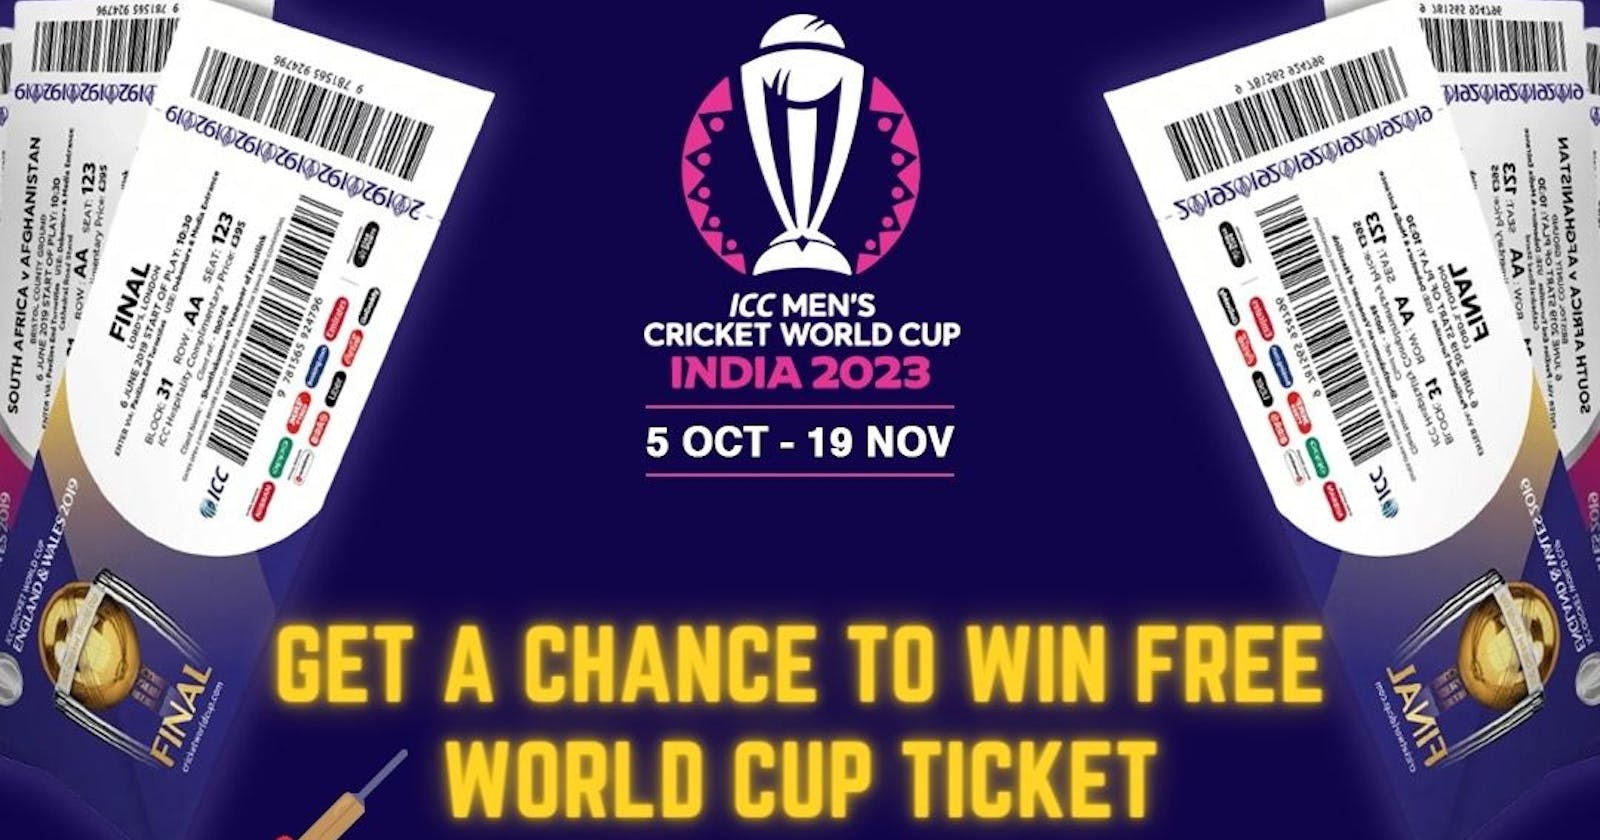 Royal Lion is now offering ICC Cricket World Cup Tickets for Free.